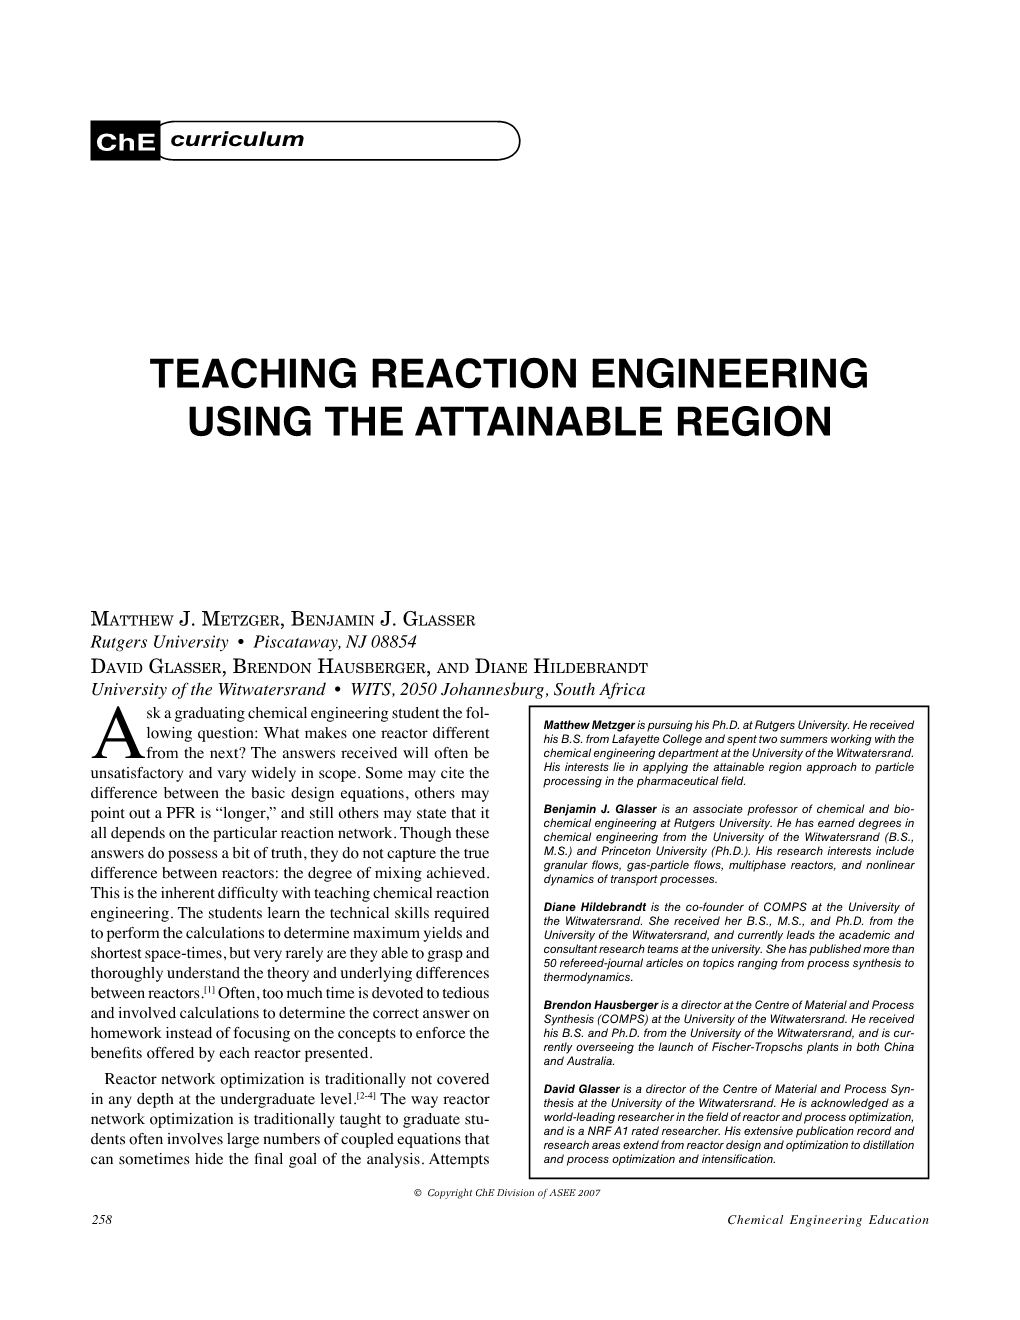 Teaching Reaction Engineering Using the Attainable Region